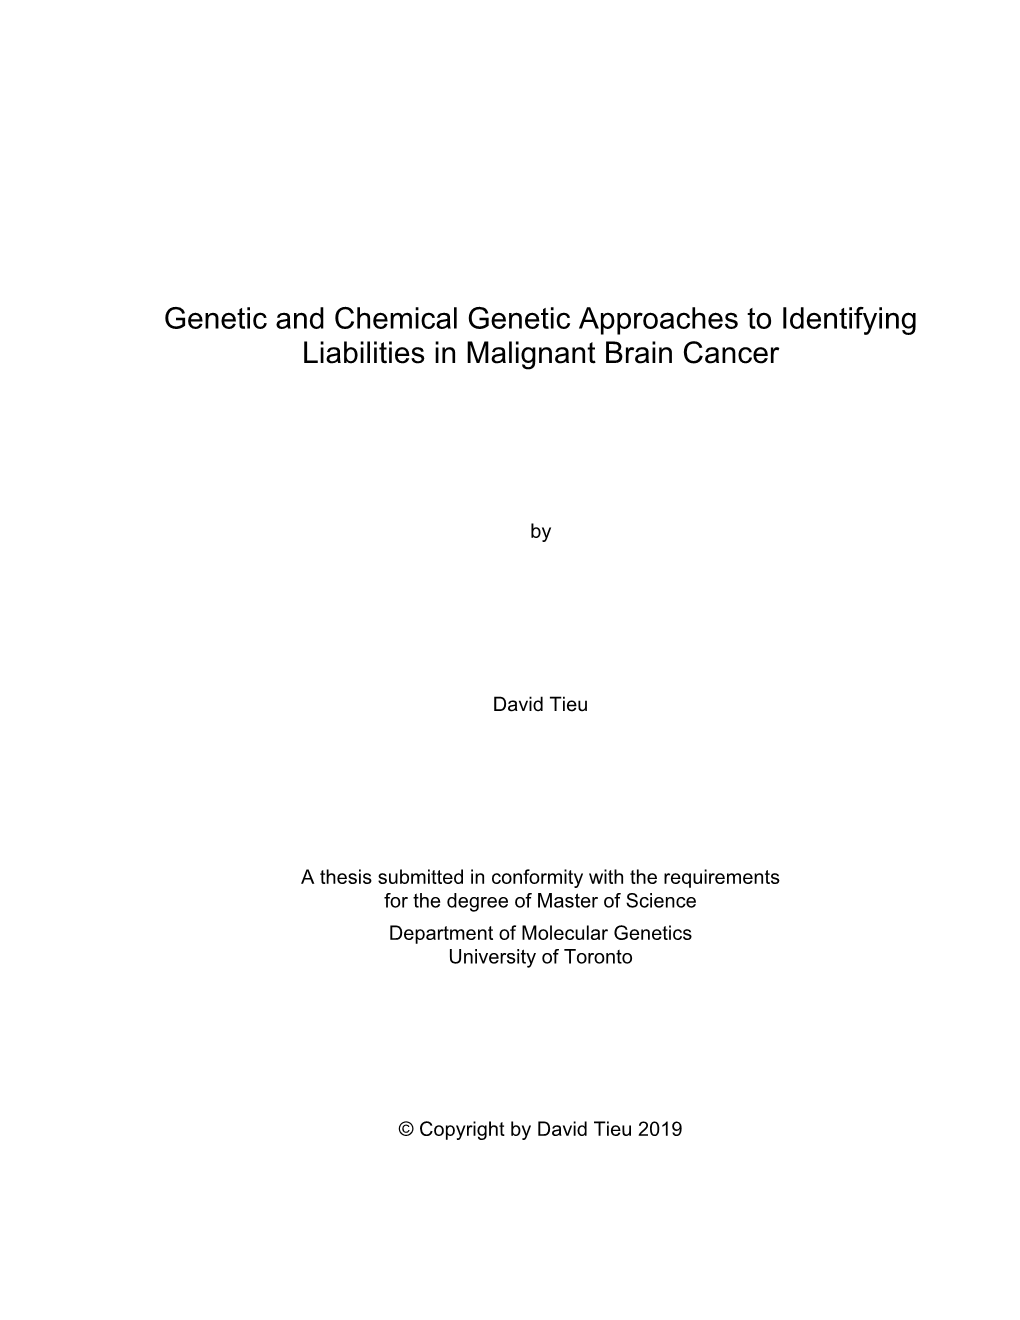 Genetic and Chemical Genetic Approaches to Identifying Liabilities in Malignant Brain Cancer